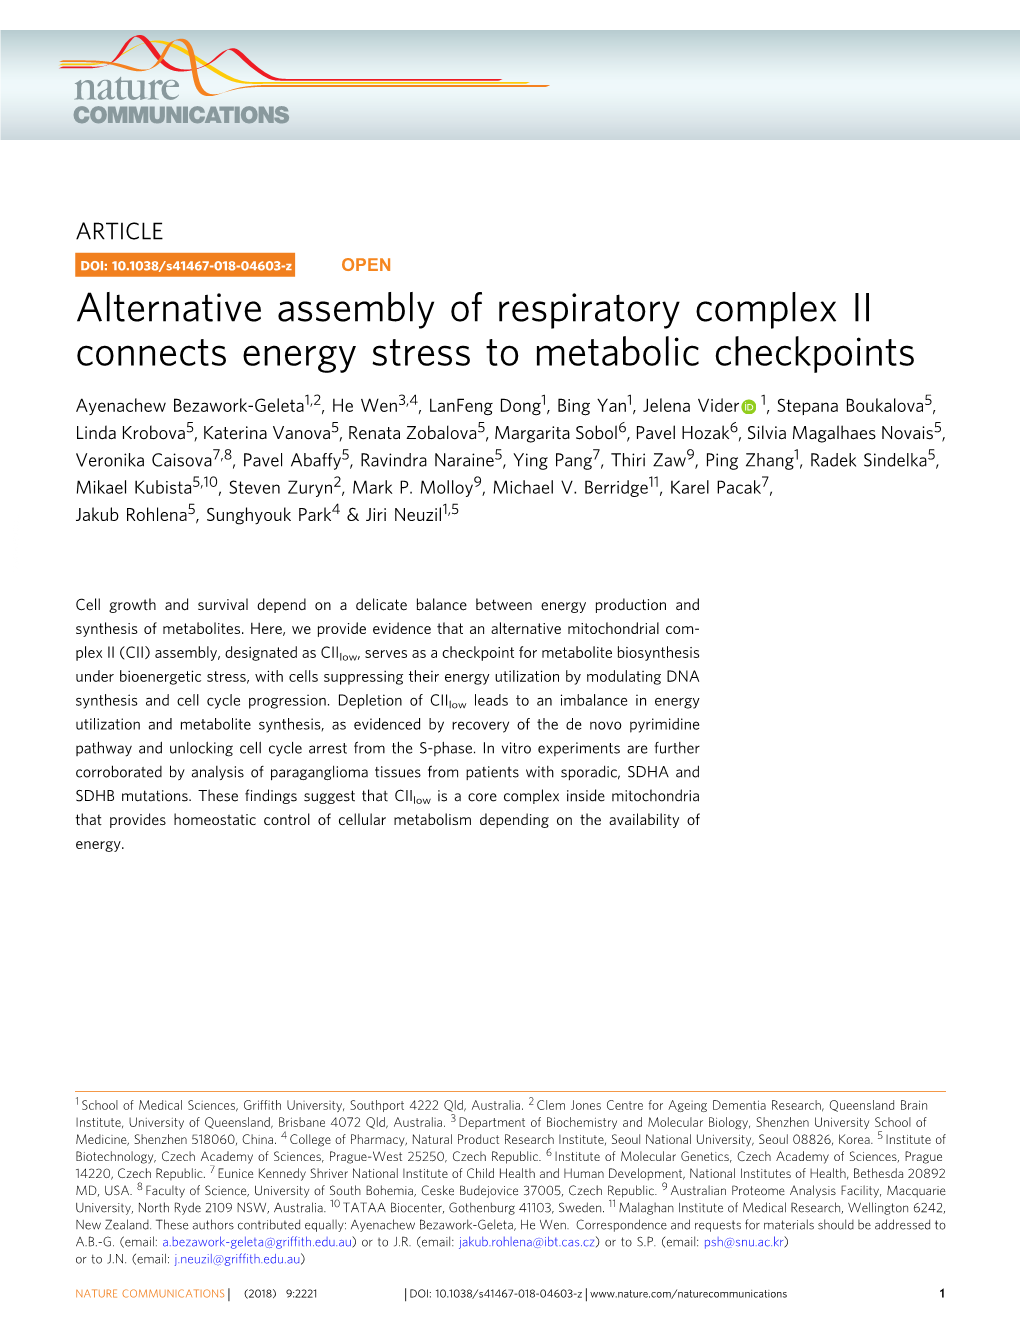 Alternative Assembly of Respiratory Complex II Connects Energy Stress to Metabolic Checkpoints